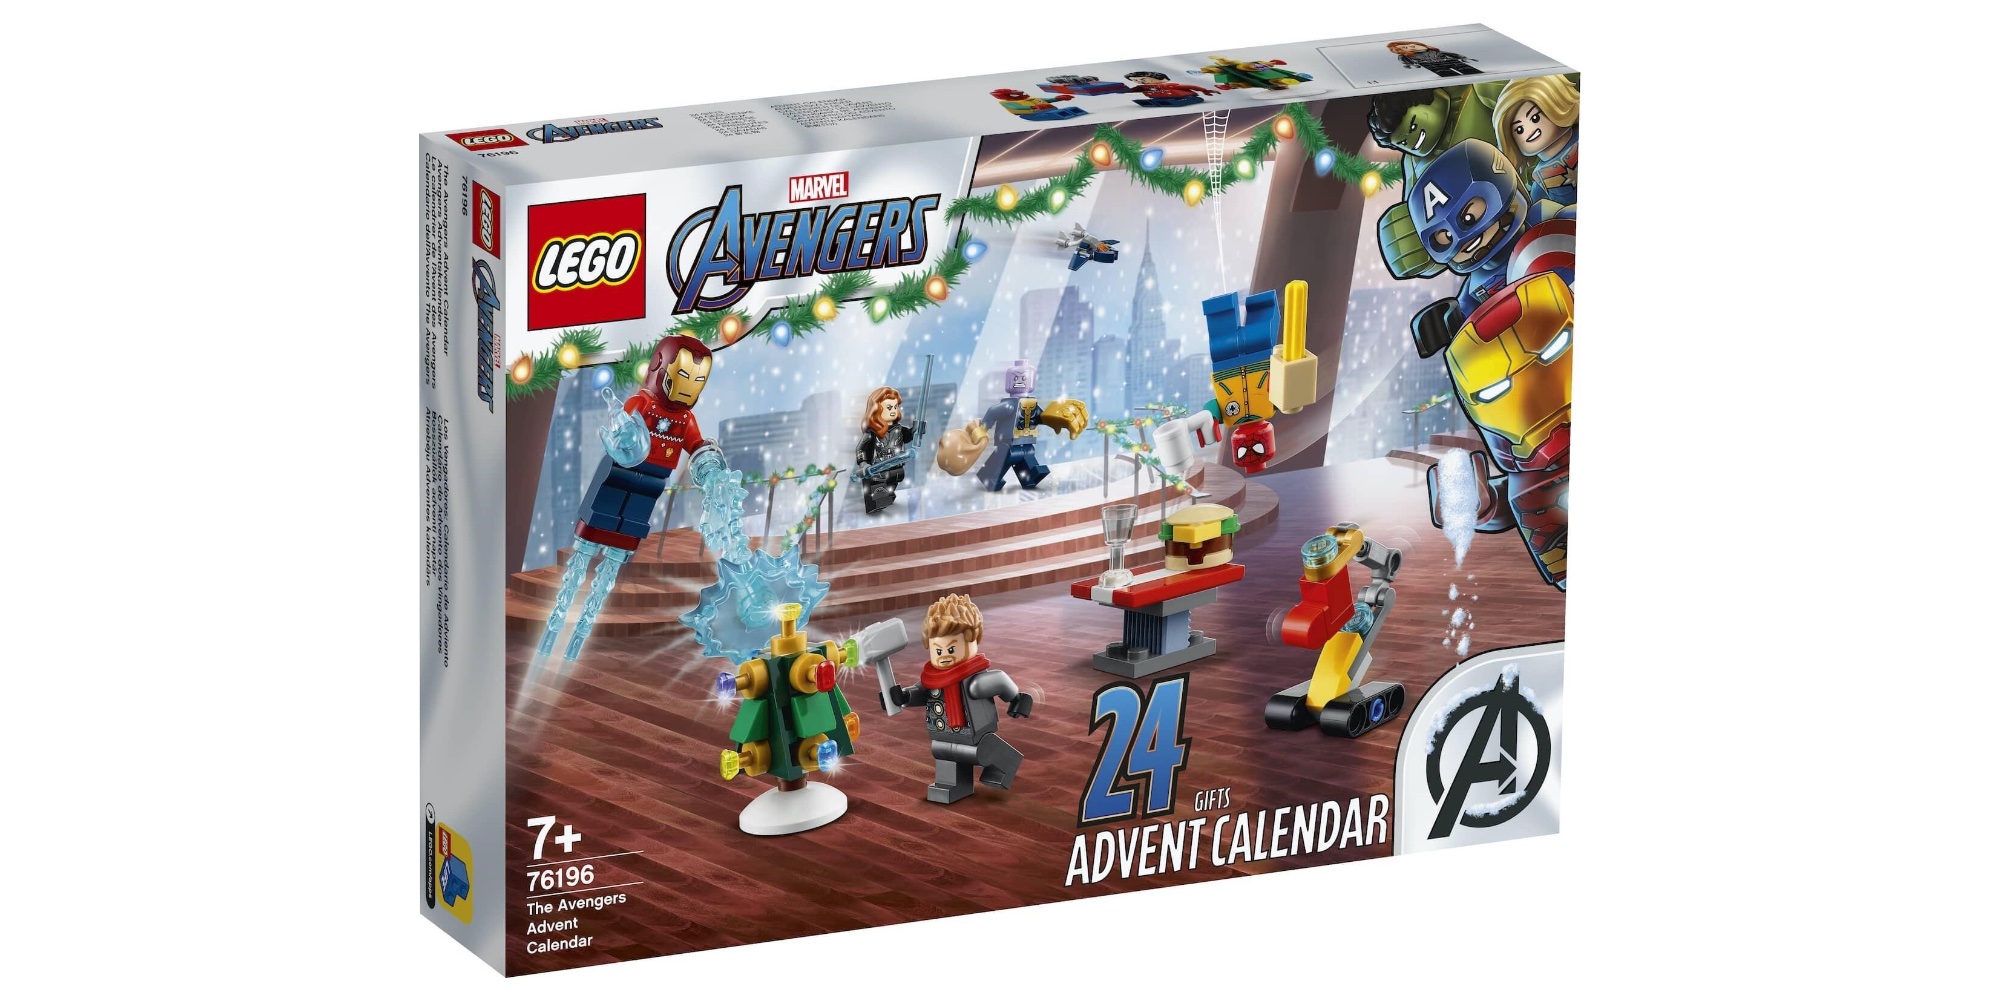 LEGO Marvel Advent Calendar launching later this year 9to5Toys